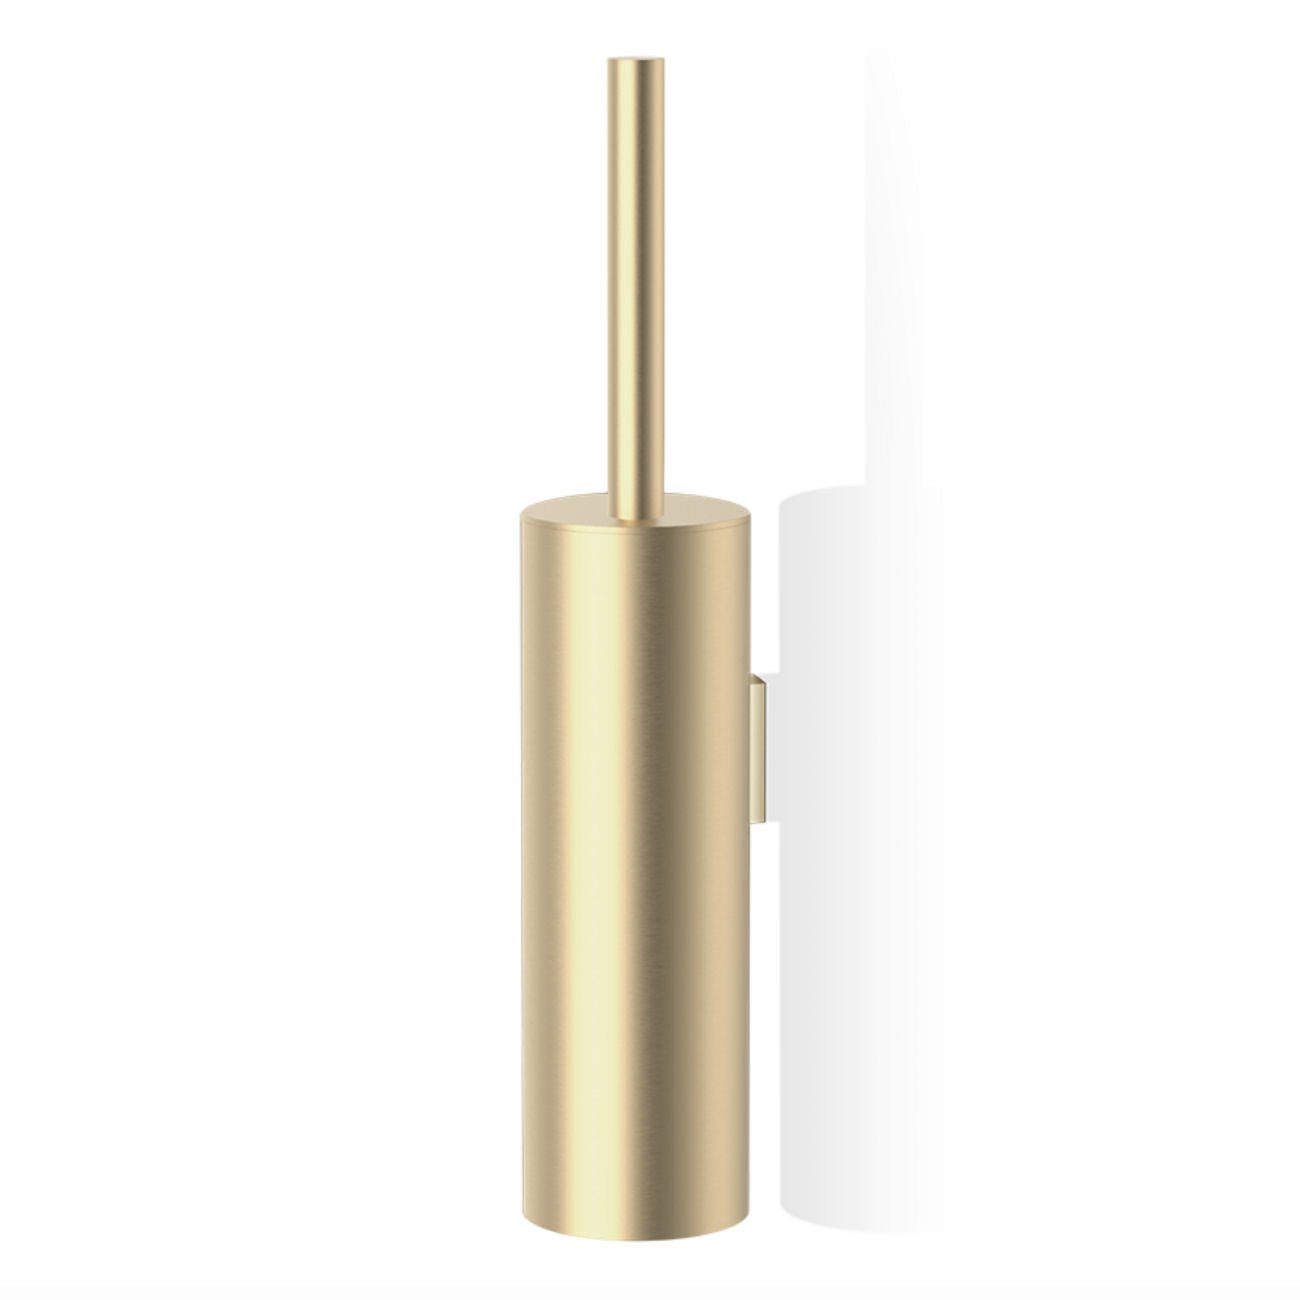 Matt Gold Wall-Mounted Toilet Brush Holder by Decor Walther - |VESIMI Design|